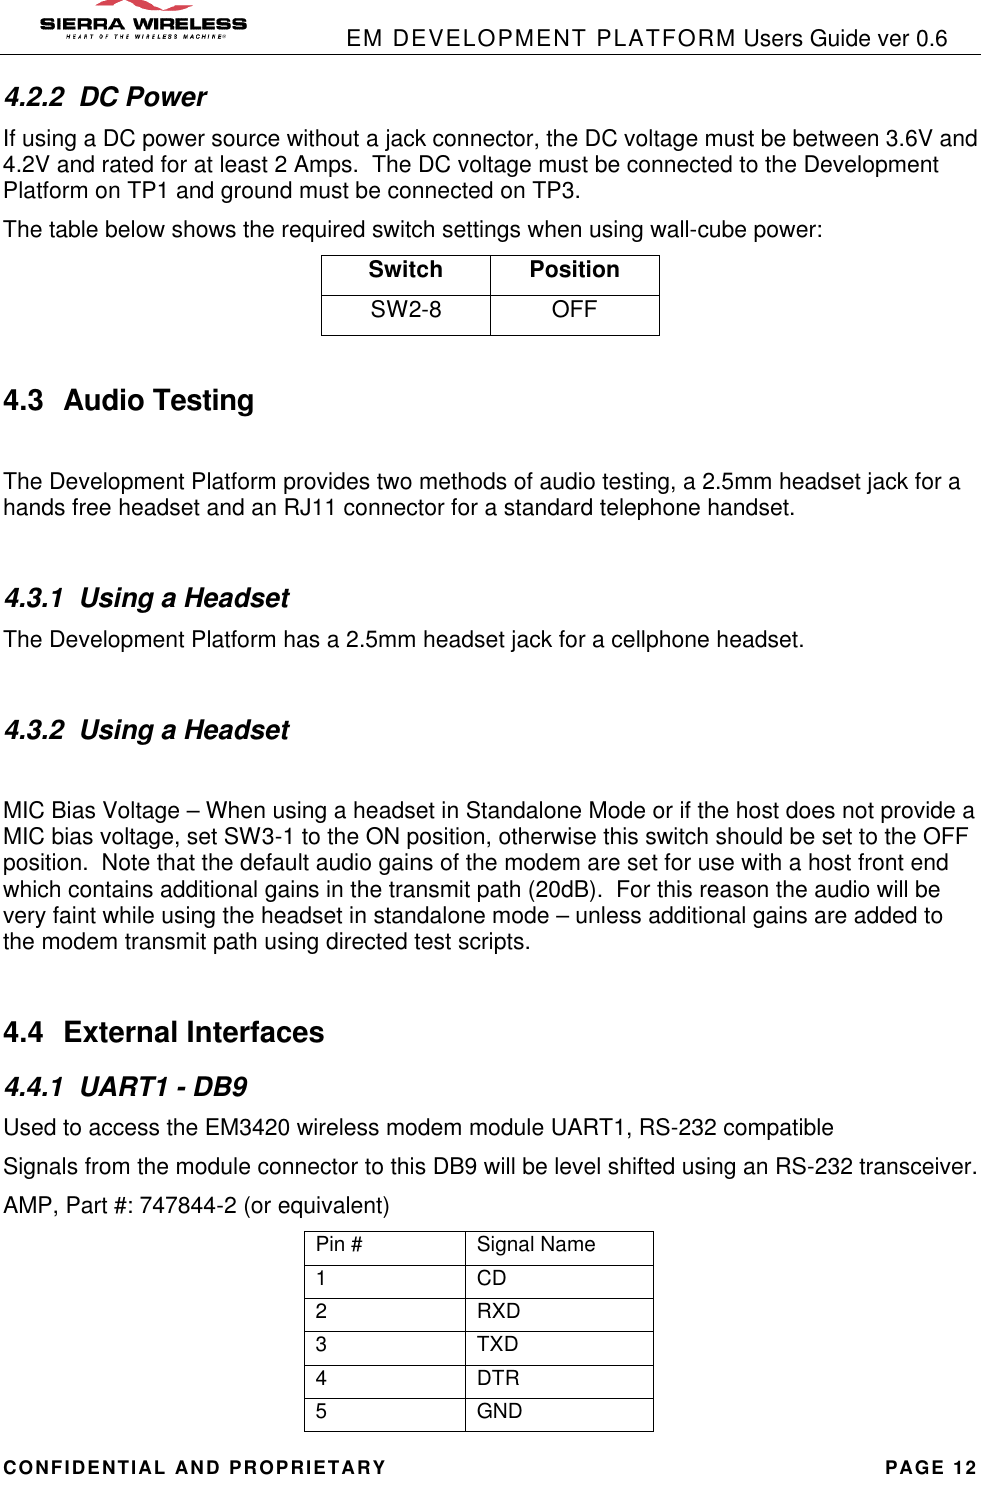            EM DEVELOPMENT PLATFORM Users Guide ver 0.6 CONFIDENTIAL AND PROPRIETARY PAGE 12 4.2.2 DC Power If using a DC power source without a jack connector, the DC voltage must be between 3.6V and 4.2V and rated for at least 2 Amps.  The DC voltage must be connected to the Development Platform on TP1 and ground must be connected on TP3.   The table below shows the required switch settings when using wall-cube power: Switch Position SW2-8 OFF  4.3 Audio Testing  The Development Platform provides two methods of audio testing, a 2.5mm headset jack for a hands free headset and an RJ11 connector for a standard telephone handset.  4.3.1 Using a Headset The Development Platform has a 2.5mm headset jack for a cellphone headset.  4.3.2 Using a Headset  MIC Bias Voltage – When using a headset in Standalone Mode or if the host does not provide a MIC bias voltage, set SW3-1 to the ON position, otherwise this switch should be set to the OFF position.  Note that the default audio gains of the modem are set for use with a host front end which contains additional gains in the transmit path (20dB).  For this reason the audio will be very faint while using the headset in standalone mode – unless additional gains are added to the modem transmit path using directed test scripts.  4.4 External Interfaces 4.4.1 UART1 - DB9 Used to access the EM3420 wireless modem module UART1, RS-232 compatible Signals from the module connector to this DB9 will be level shifted using an RS-232 transceiver. AMP, Part #: 747844-2 (or equivalent) Pin # Signal Name 1 CD 2 RXD 3 TXD 4 DTR 5 GND 